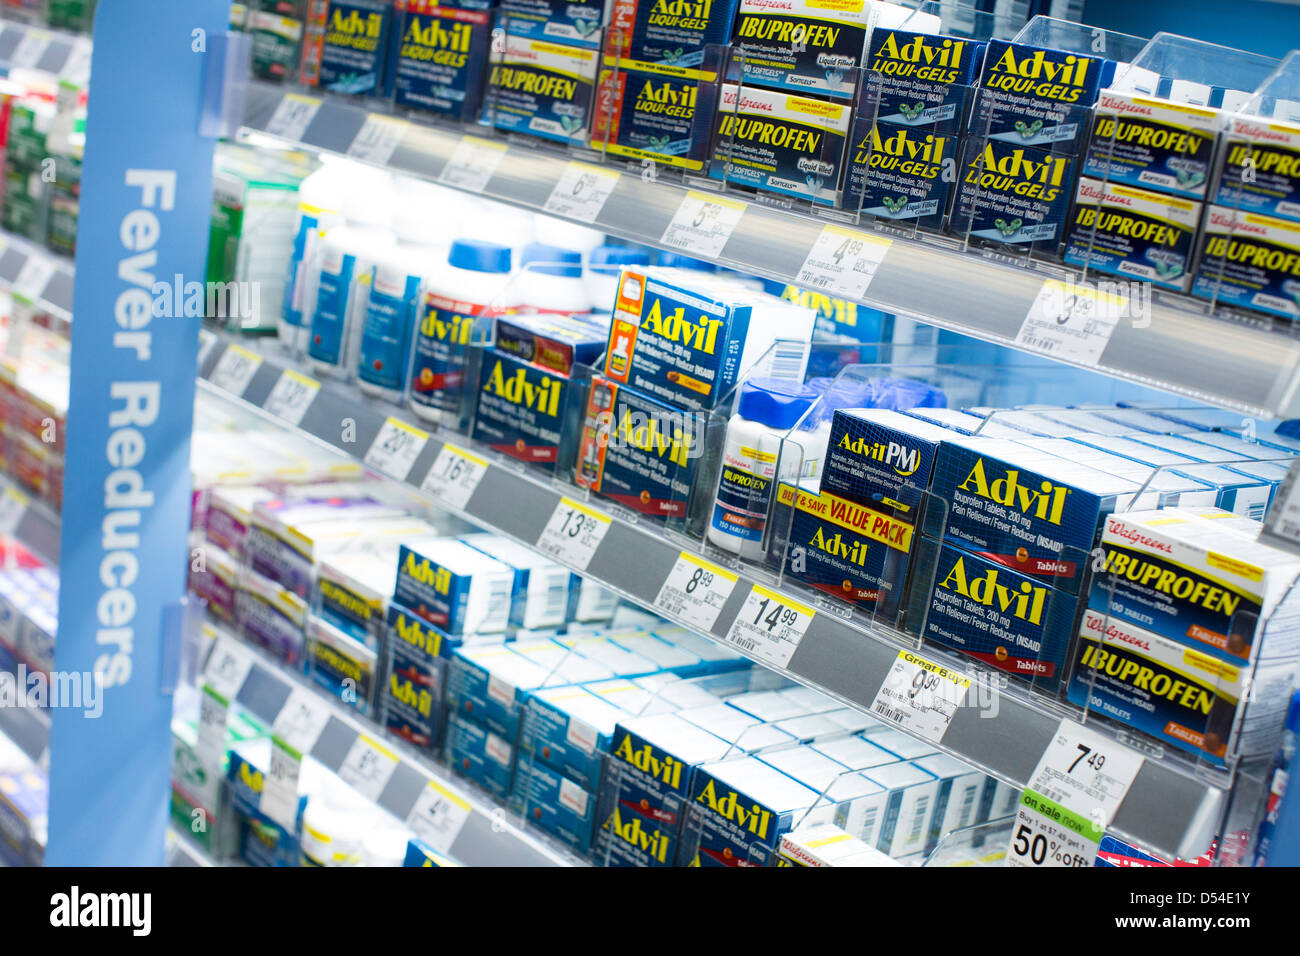 Advil pain relievers on display at a Walgreens Flagship store.  Stock Photo